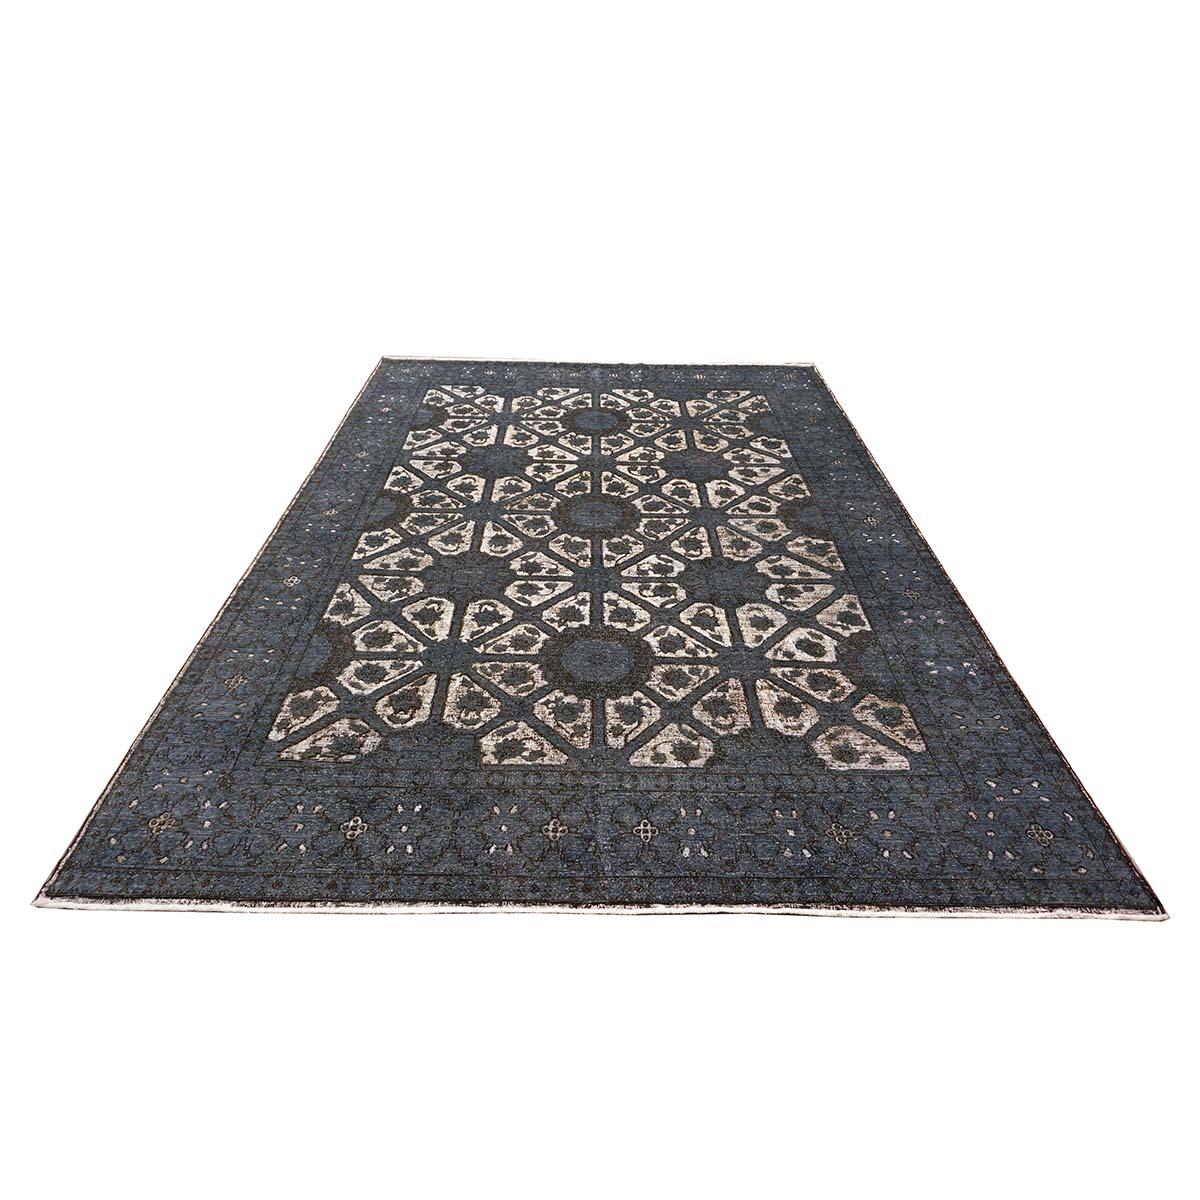 Ashly Fine Rugs presents a new distressed modern Afghan rug. These rugs have been overdyed and distressed with a custom design to give them an antique feel, but yet a modern look. This piece was overdyed with a beautiful slate color, along with the